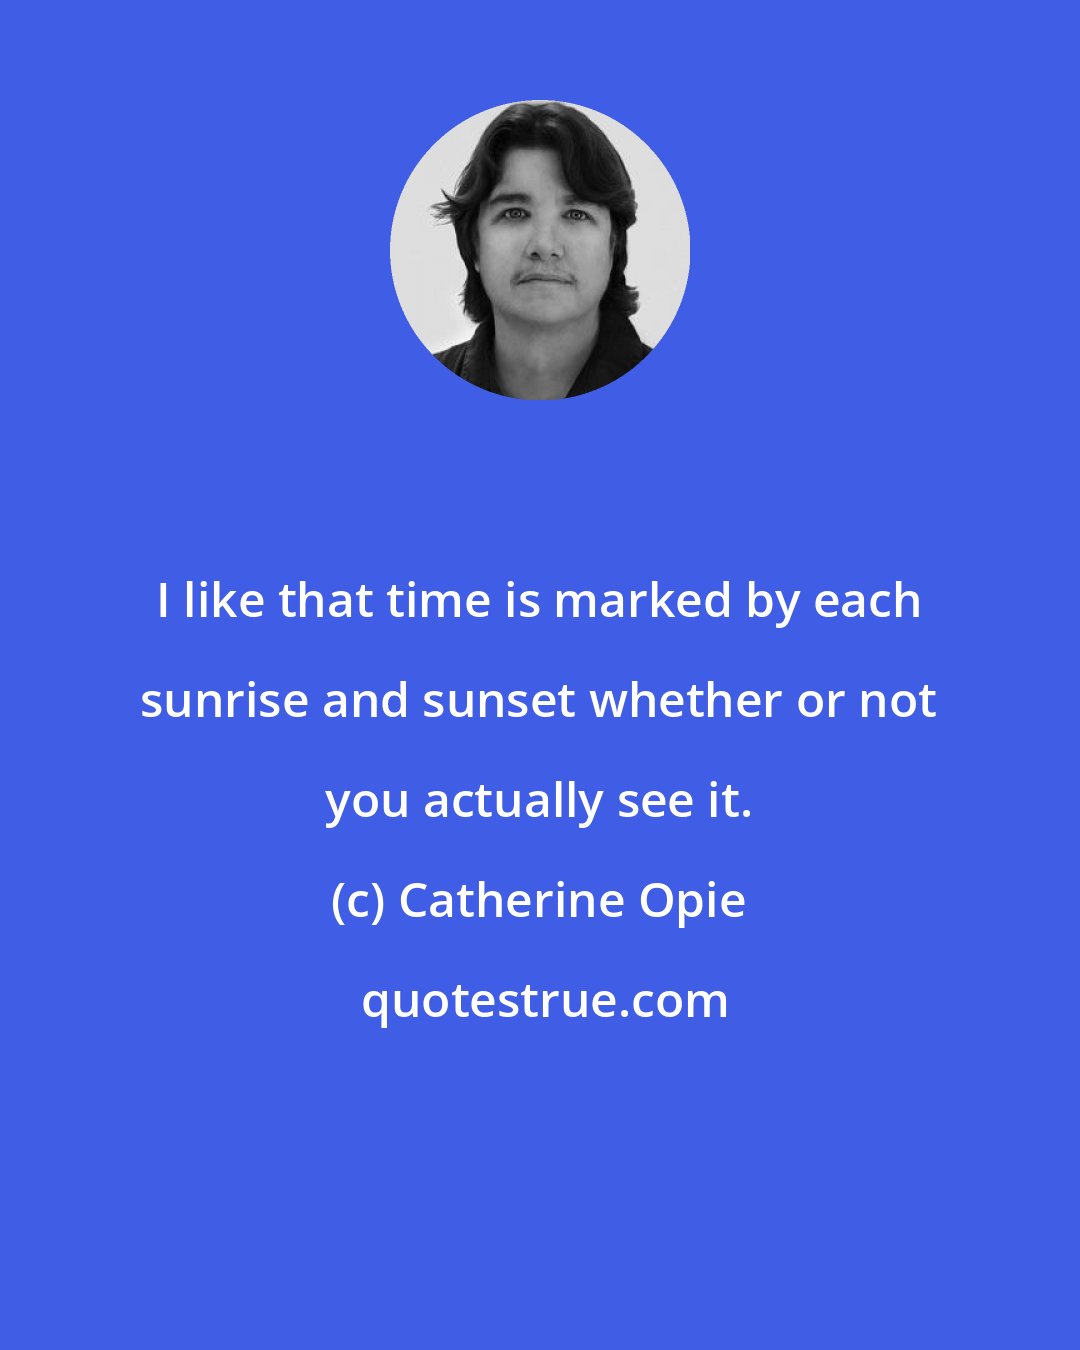 Catherine Opie: I like that time is marked by each sunrise and sunset whether or not you actually see it.